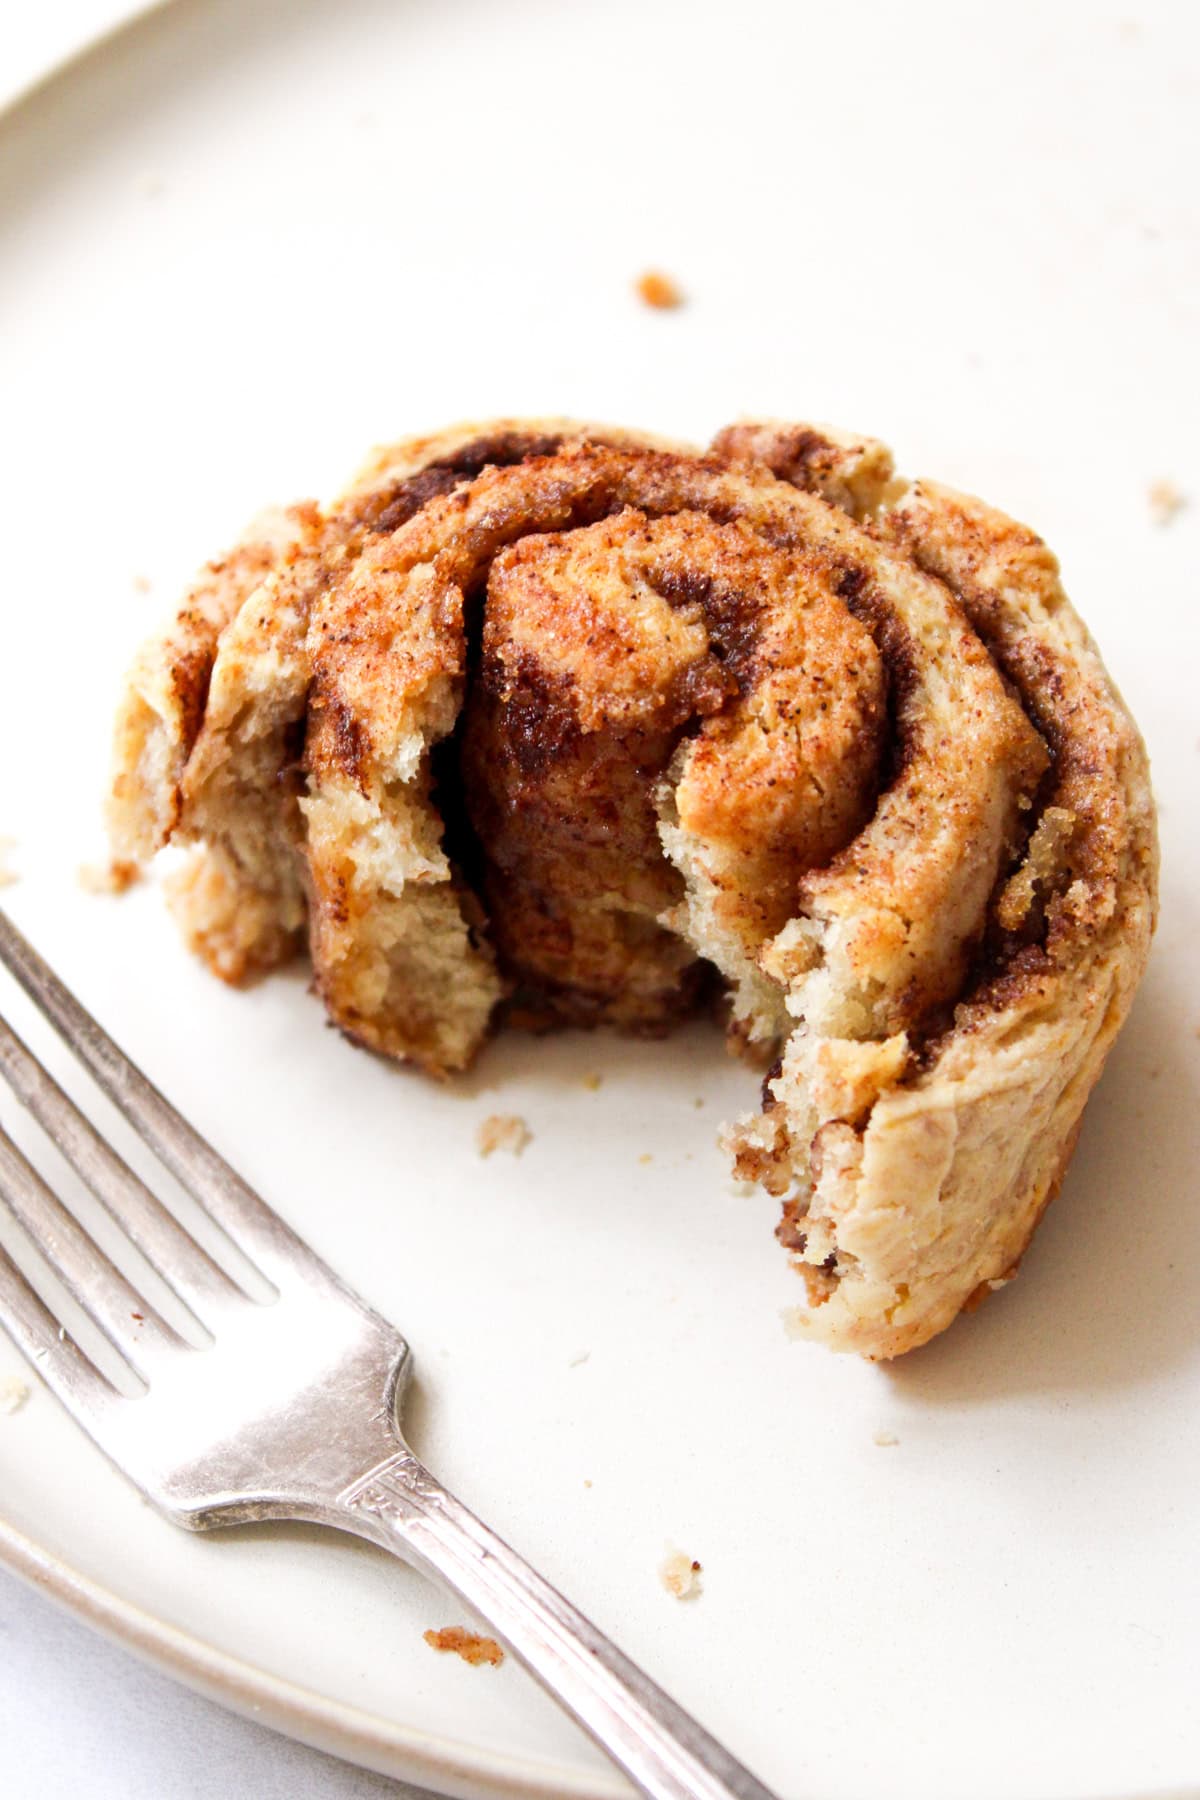 whole wheat cinnamon roll on a beige plate laying next to a fork; the first layers of the cinnamon roll are eaten away to reveal the dark cinnamon center of the roll